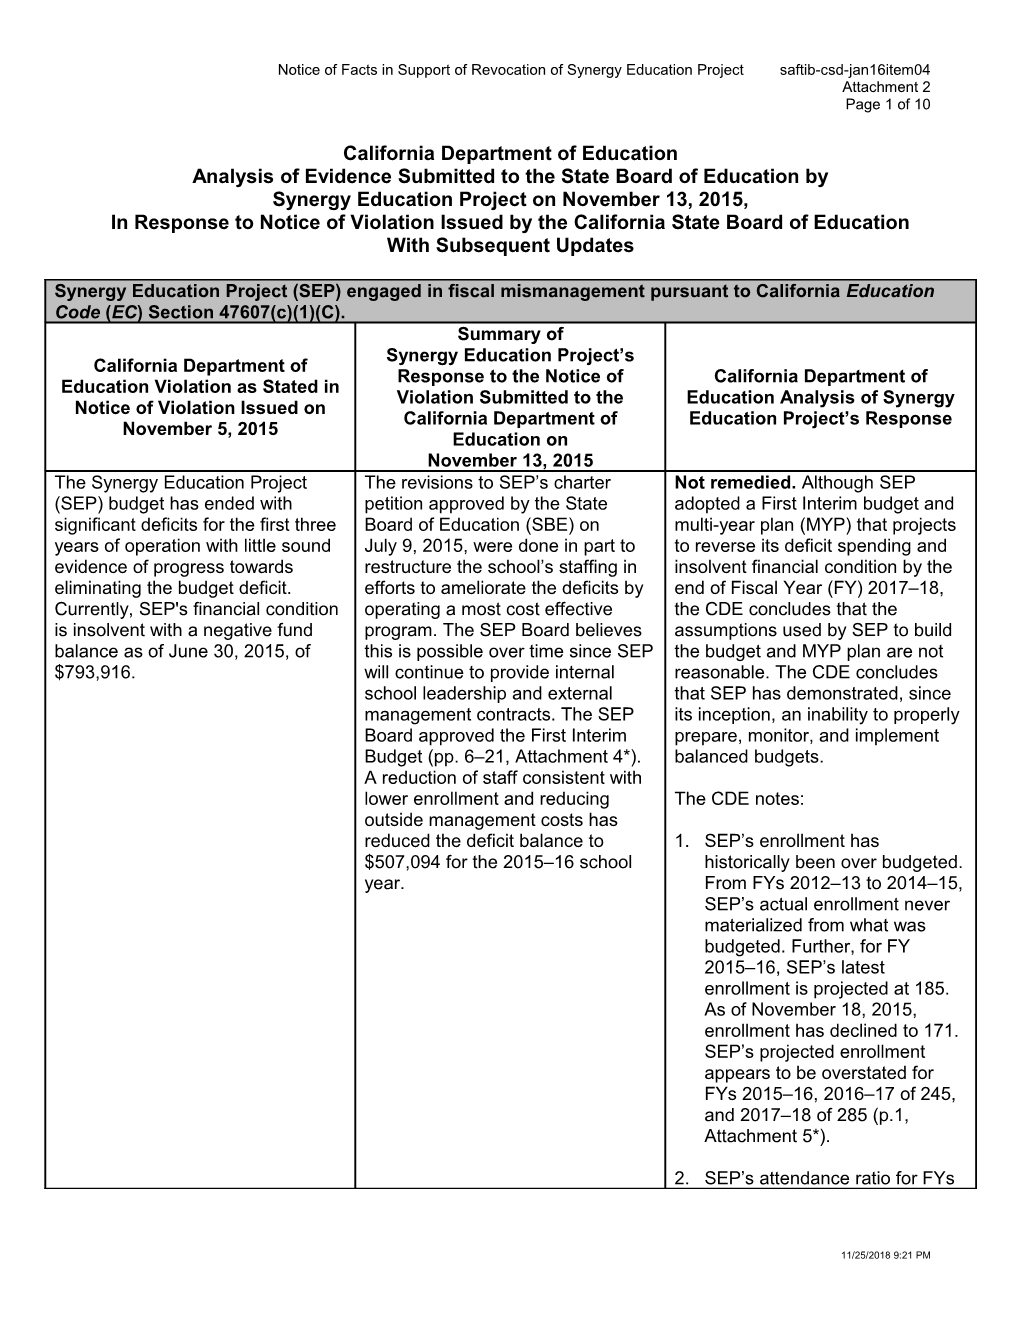 January 2016 Agenda Item 10 Attachment 2 - Meeting Agendas (CA State Board of Education)